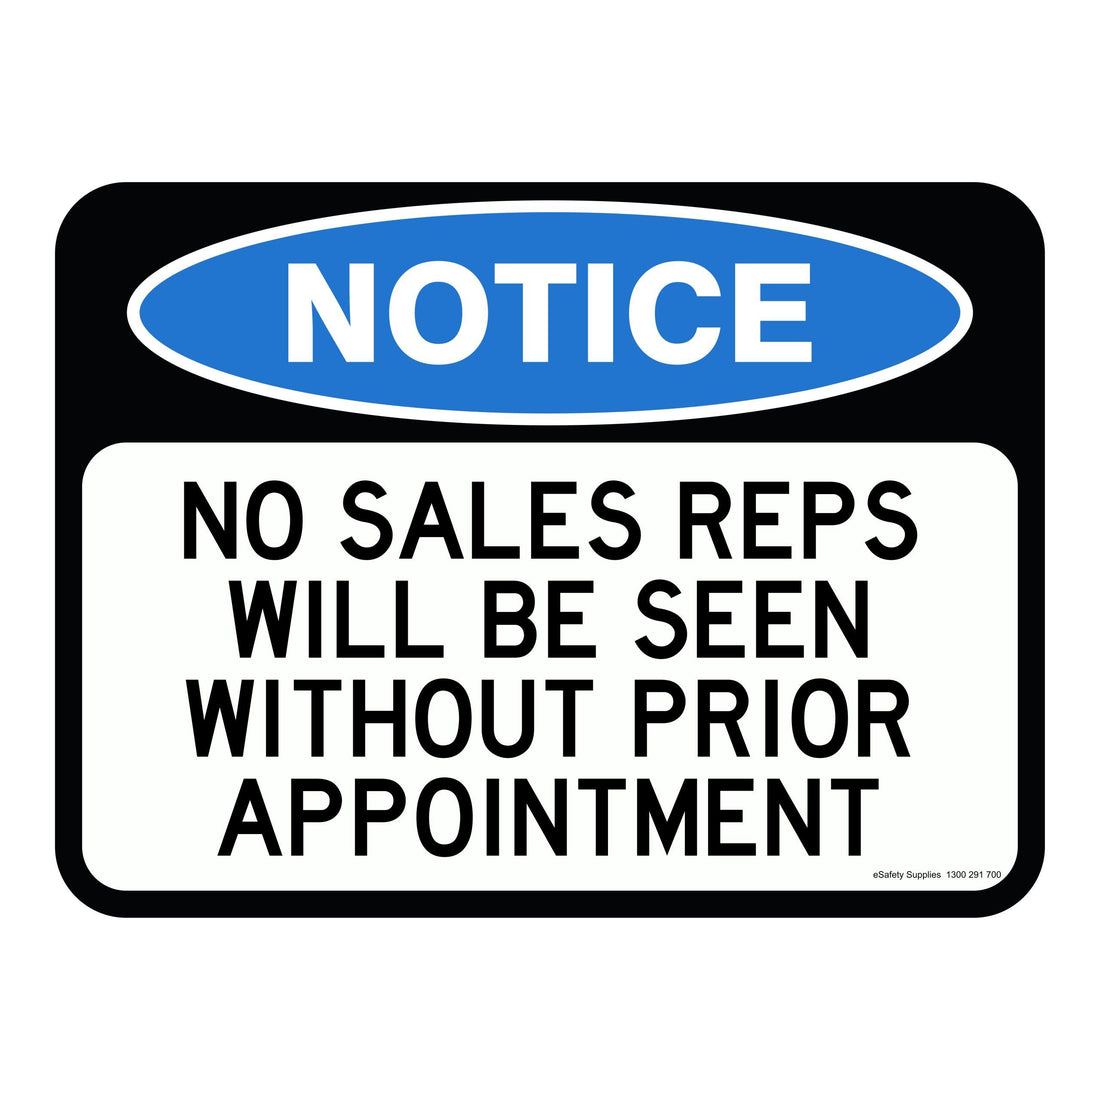 NOTICE - NO SALES REPS WILL BE SEEN WITHOUT PRIOR APPOINTMENT